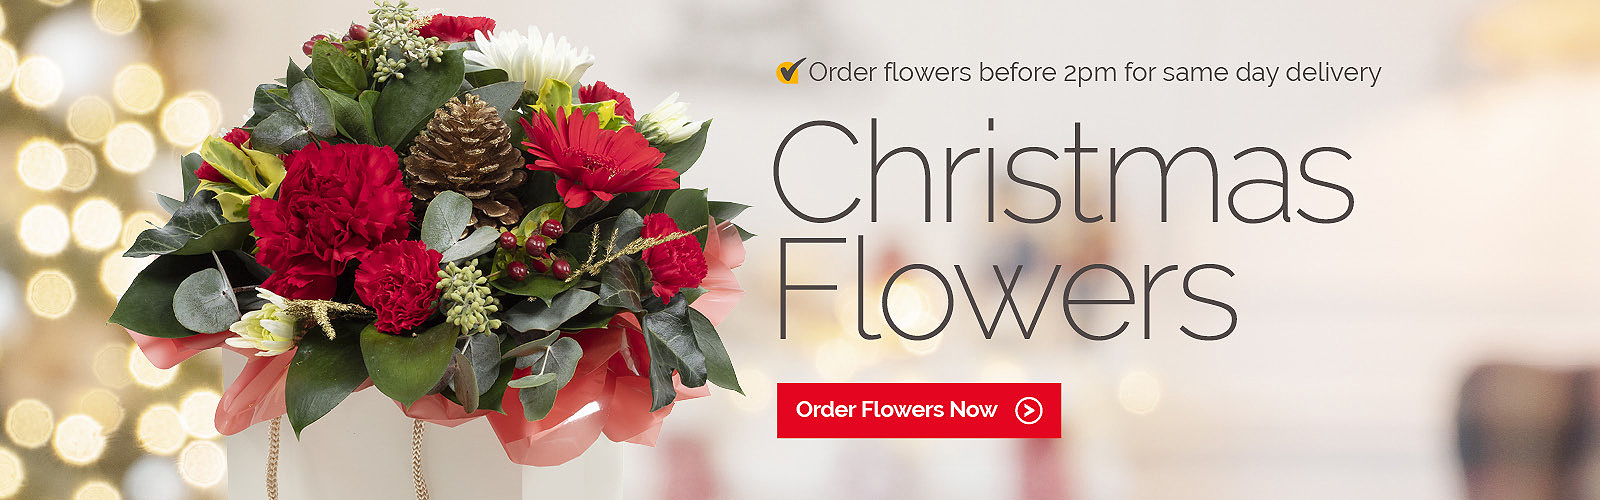 Whiston Flowers Rotherham - Order Online or Call 01709 548934